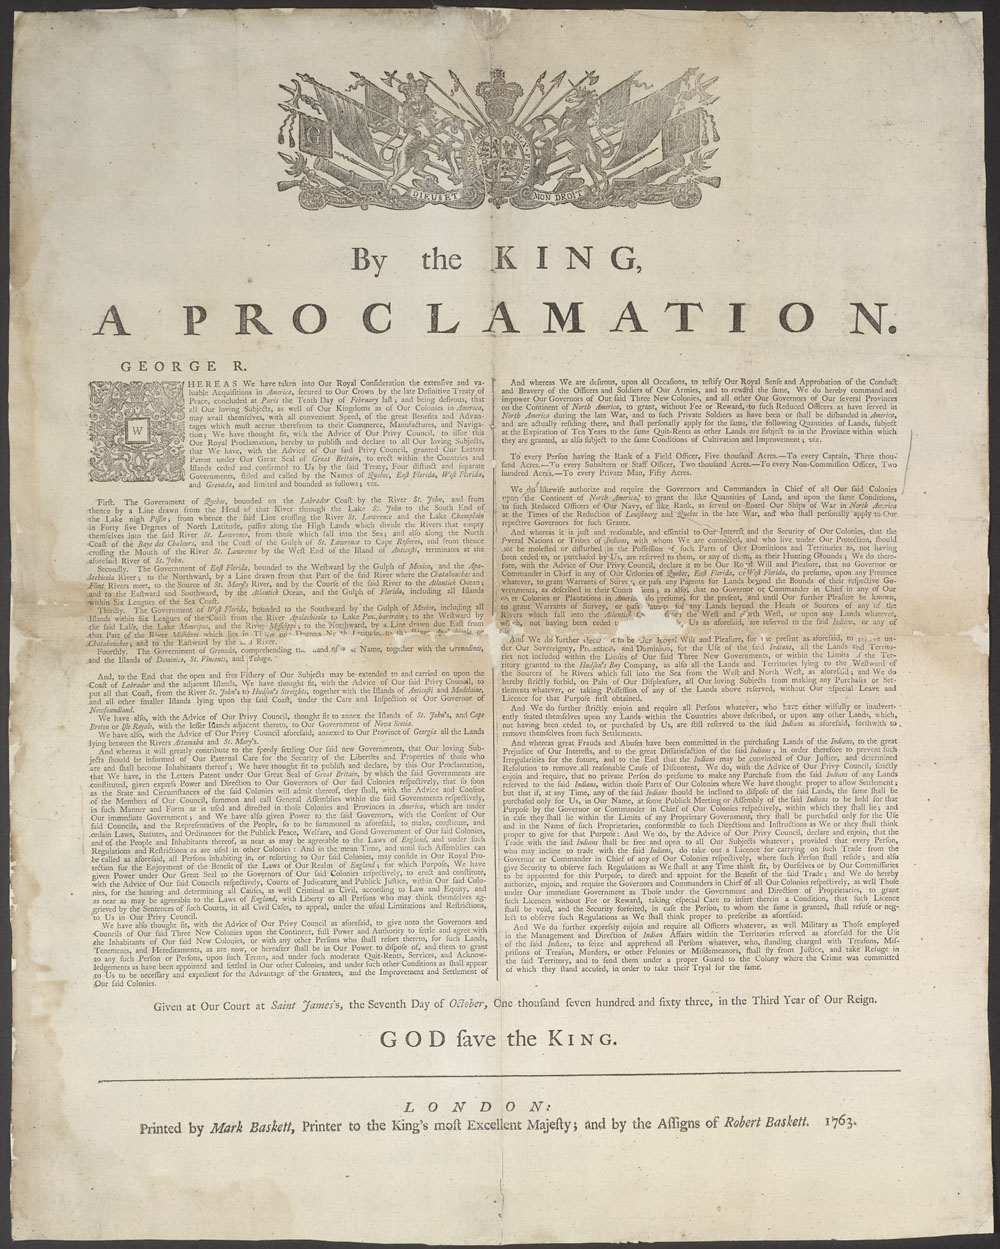 By King George III - http://data2.collectionscanada.gc.ca/e/e432/e010778430-v8.jpghttps://bac-lac.on.worldcat.org/oclc/1007612335Uploaded by JoshSmWaldorf, Public Domain, https://commons.wikimedia.org/w/index.php?curid=66136676